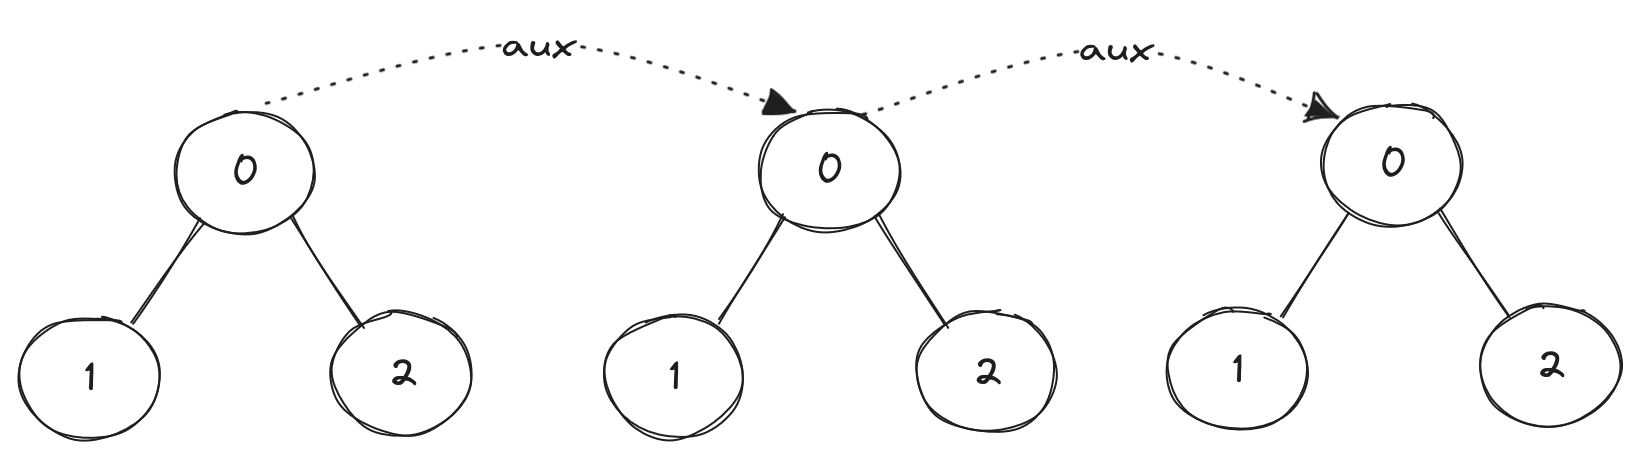 three trees, each with two leaves connected to a root node. the rootnode of the leftmost tree has an arrow labeled &ldquo;aux&rdquo; that points tothe root of the center tree. the root node of the center tree has anarrow labeled &ldquo;aux&rdquo; that points to the root of the leftmost tree